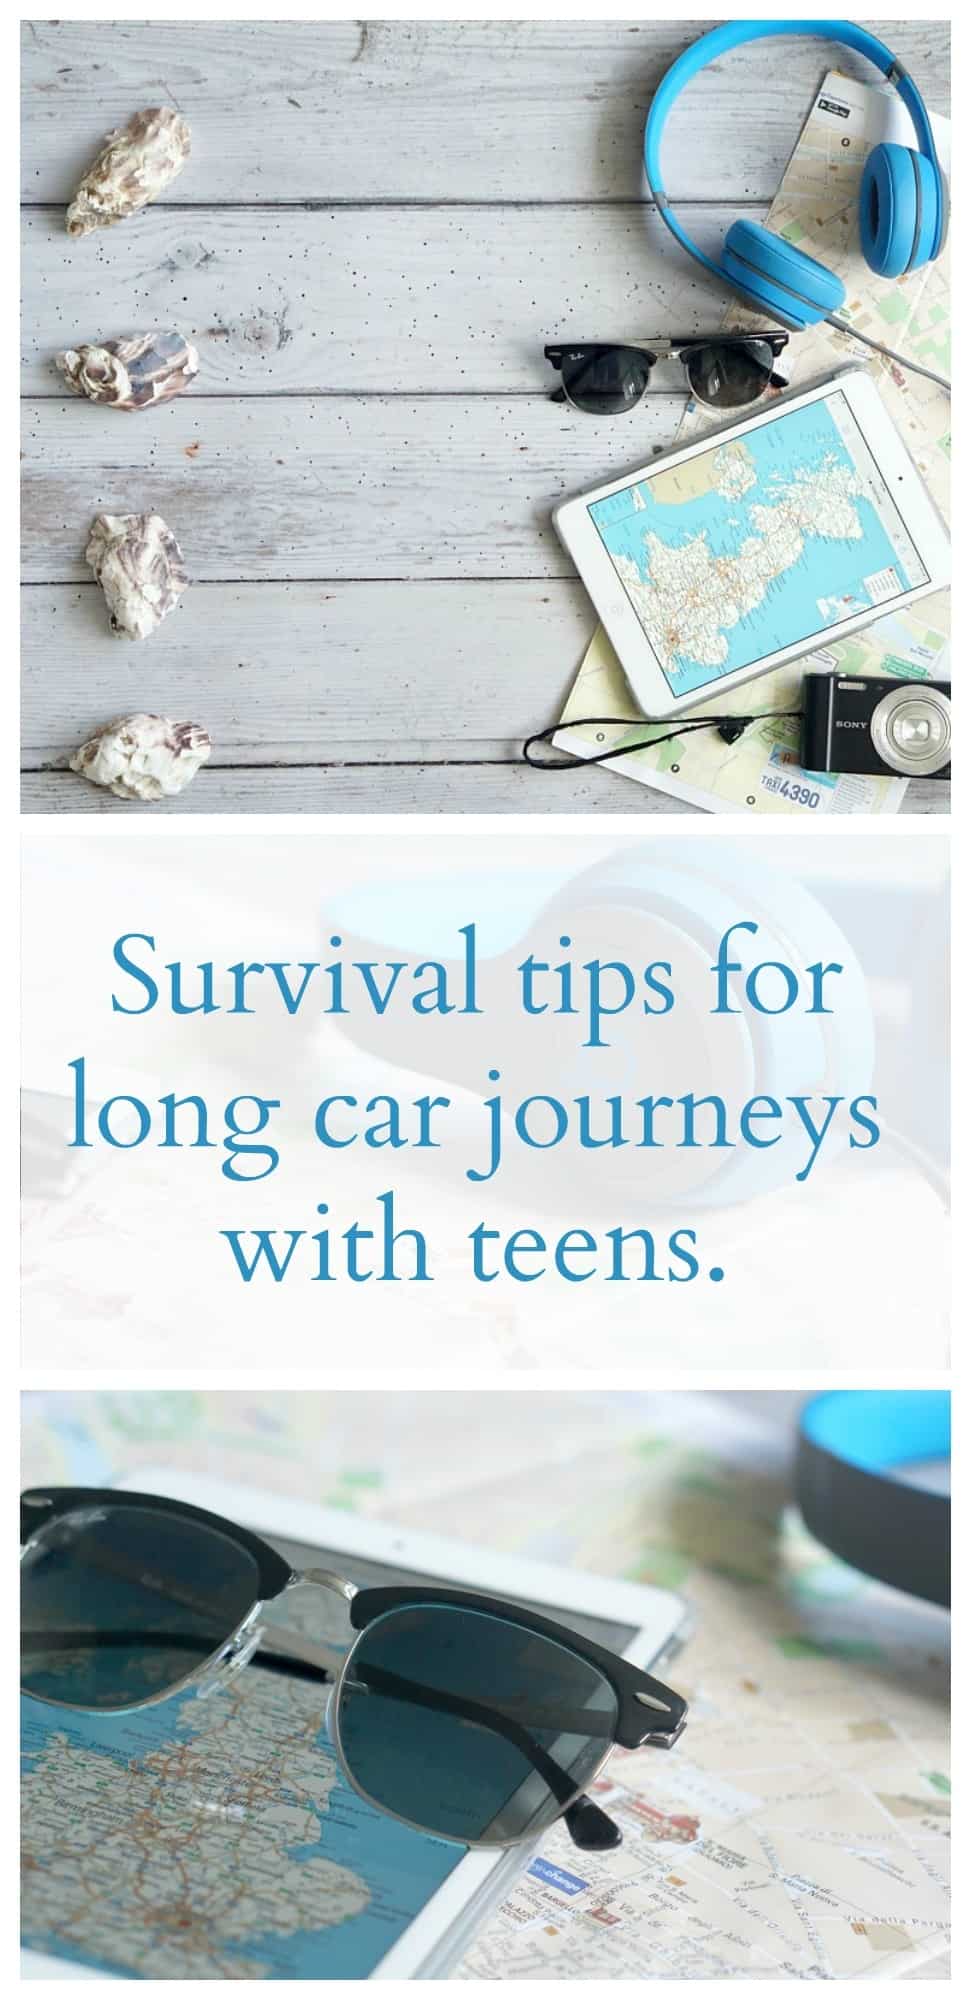 Survival tips for long car journeys with teens